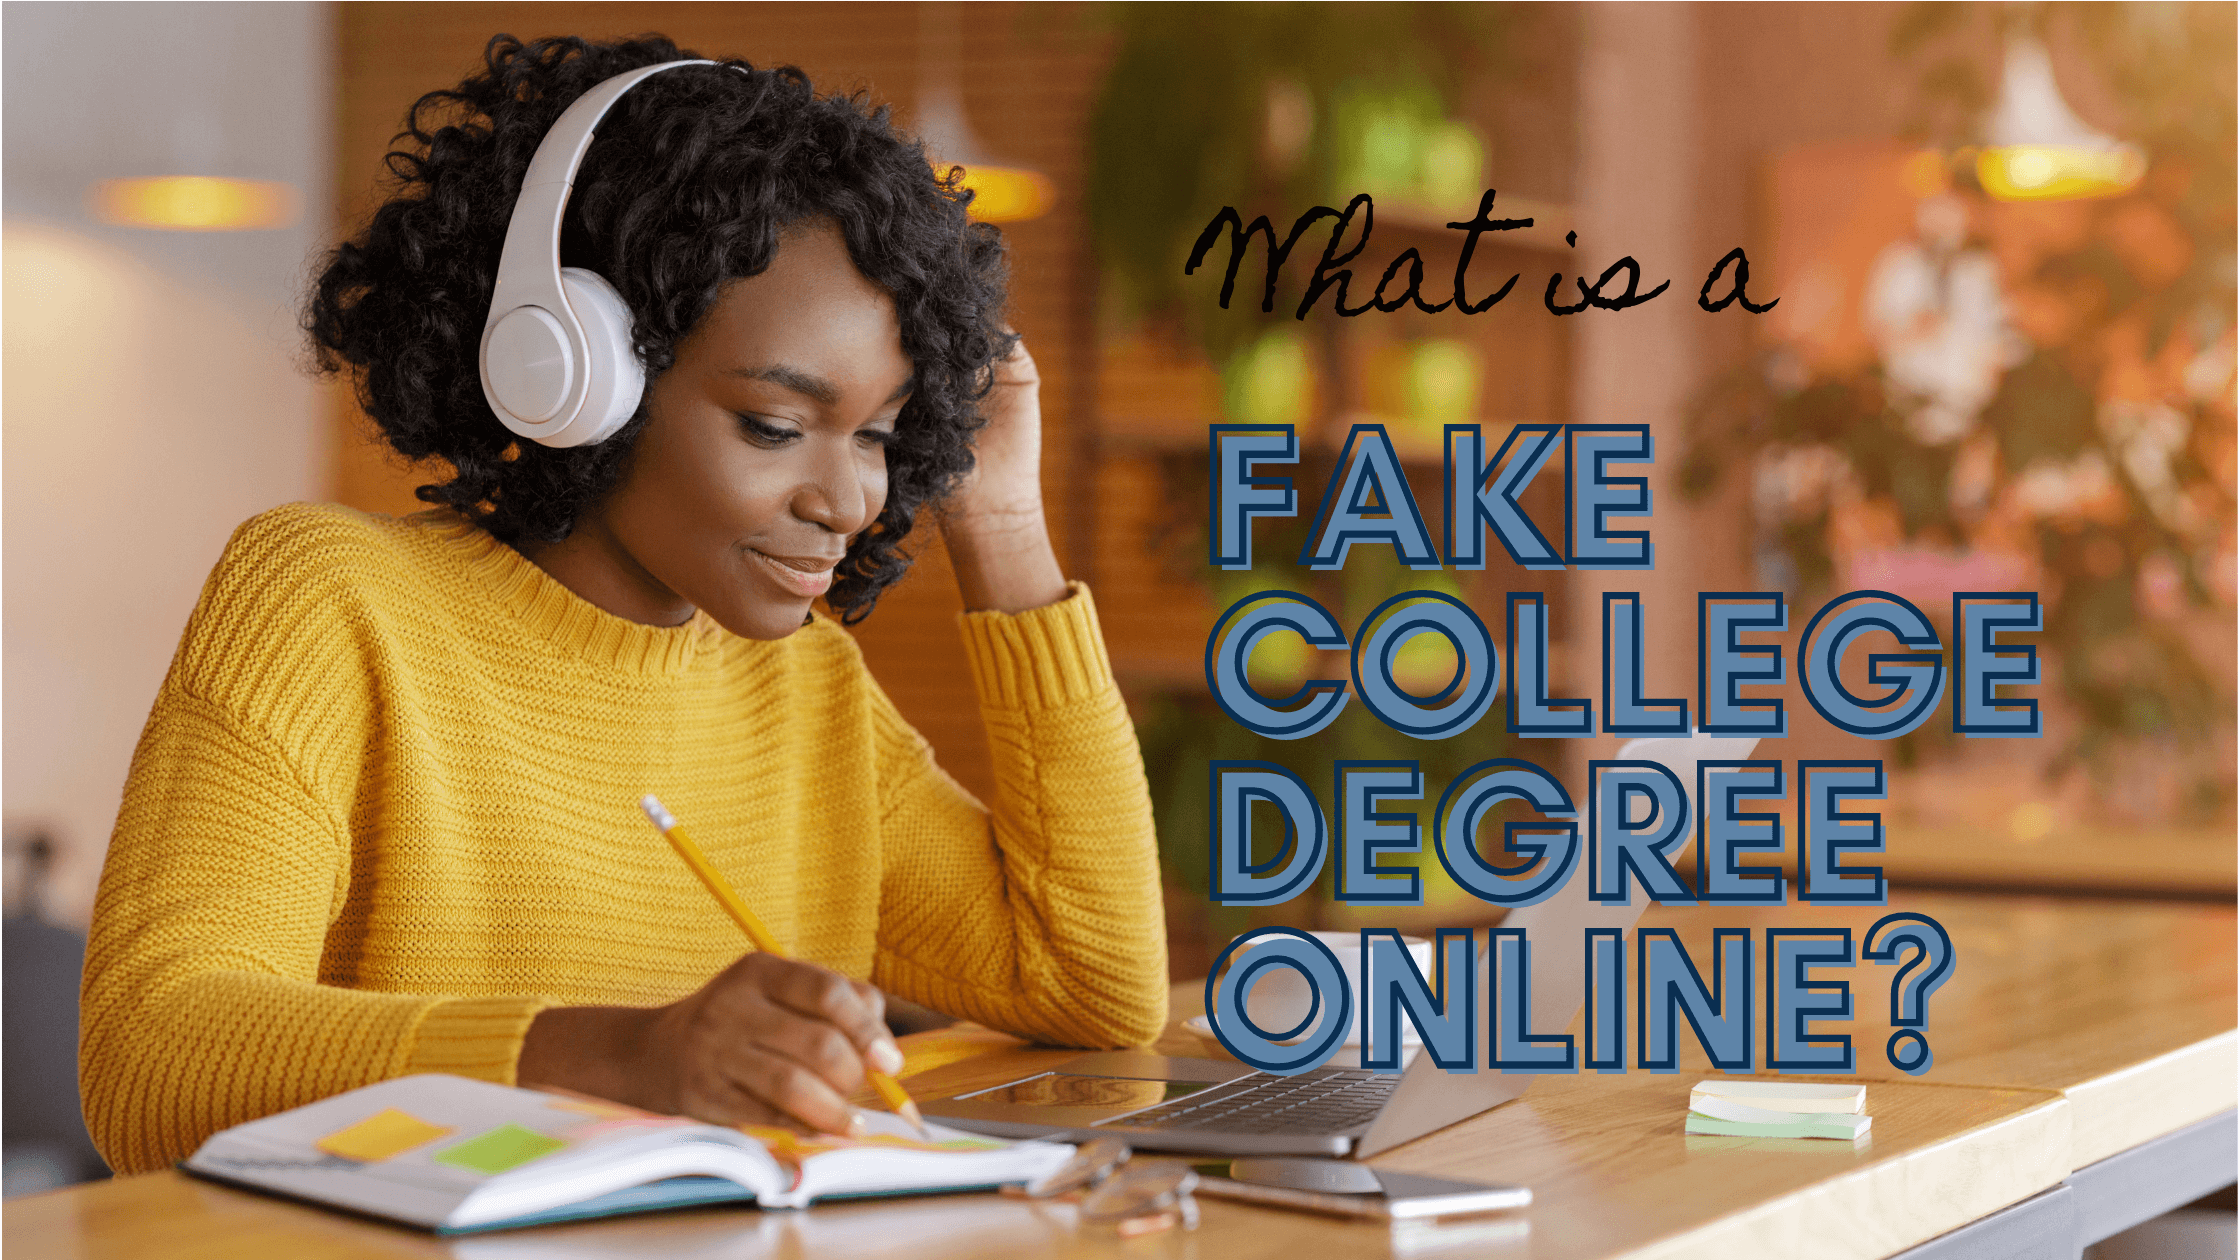 black woman on laptop in yellow sweater looking up fake college degree online options